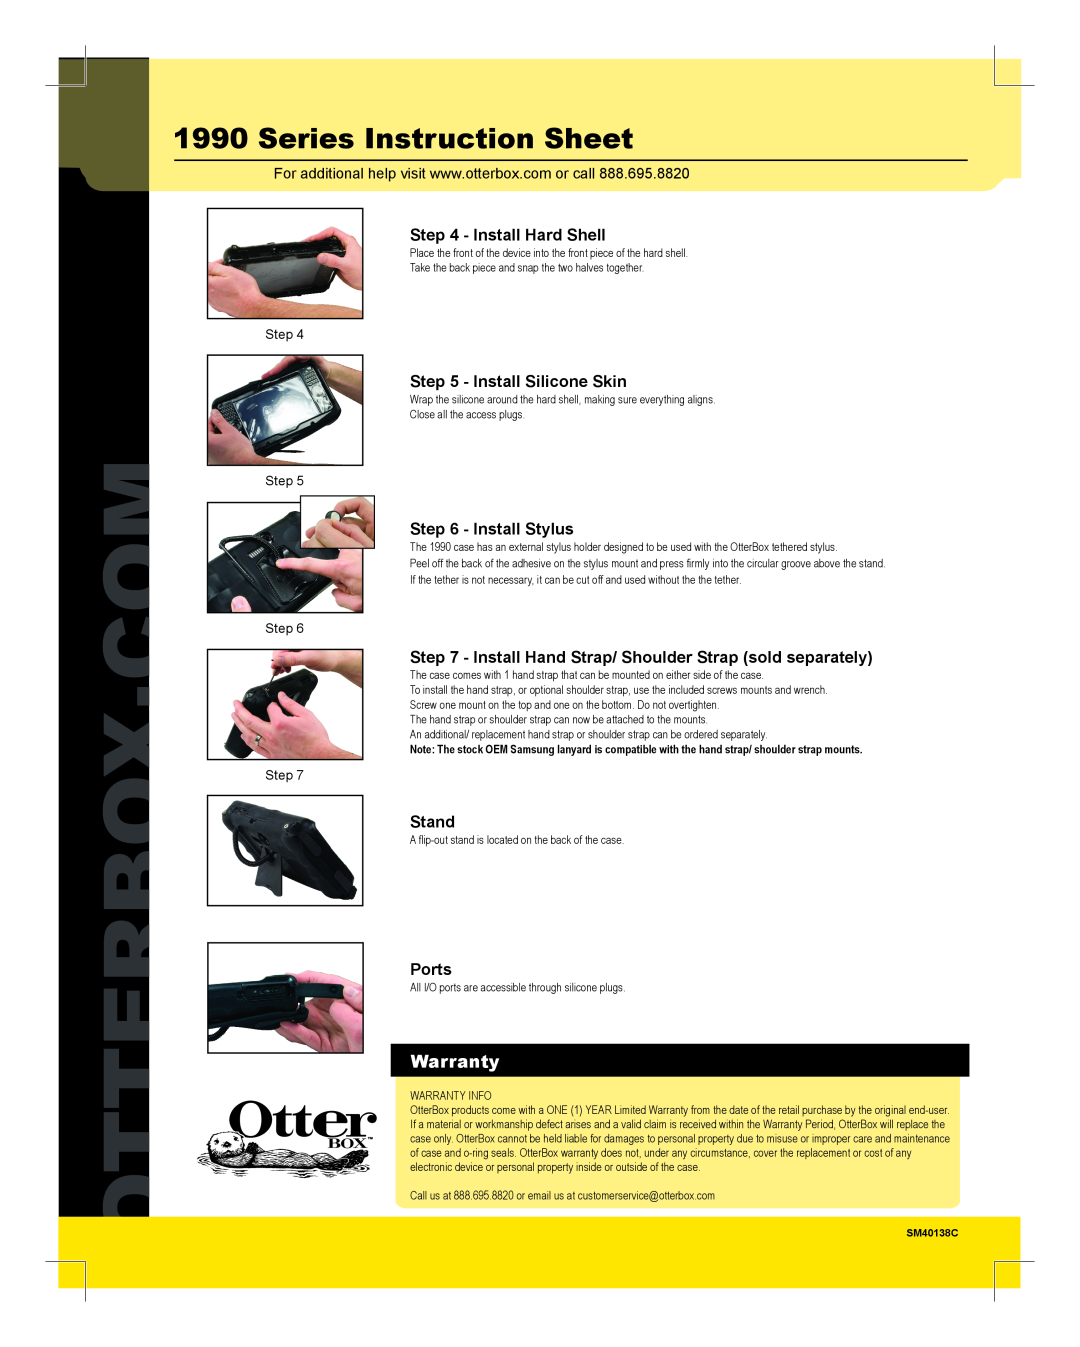 Otter Products q1 Install Hard Shell, Install Silicone Skin, Install Stylus, Stand, Ports, Step Step Step, Otterbox Com 